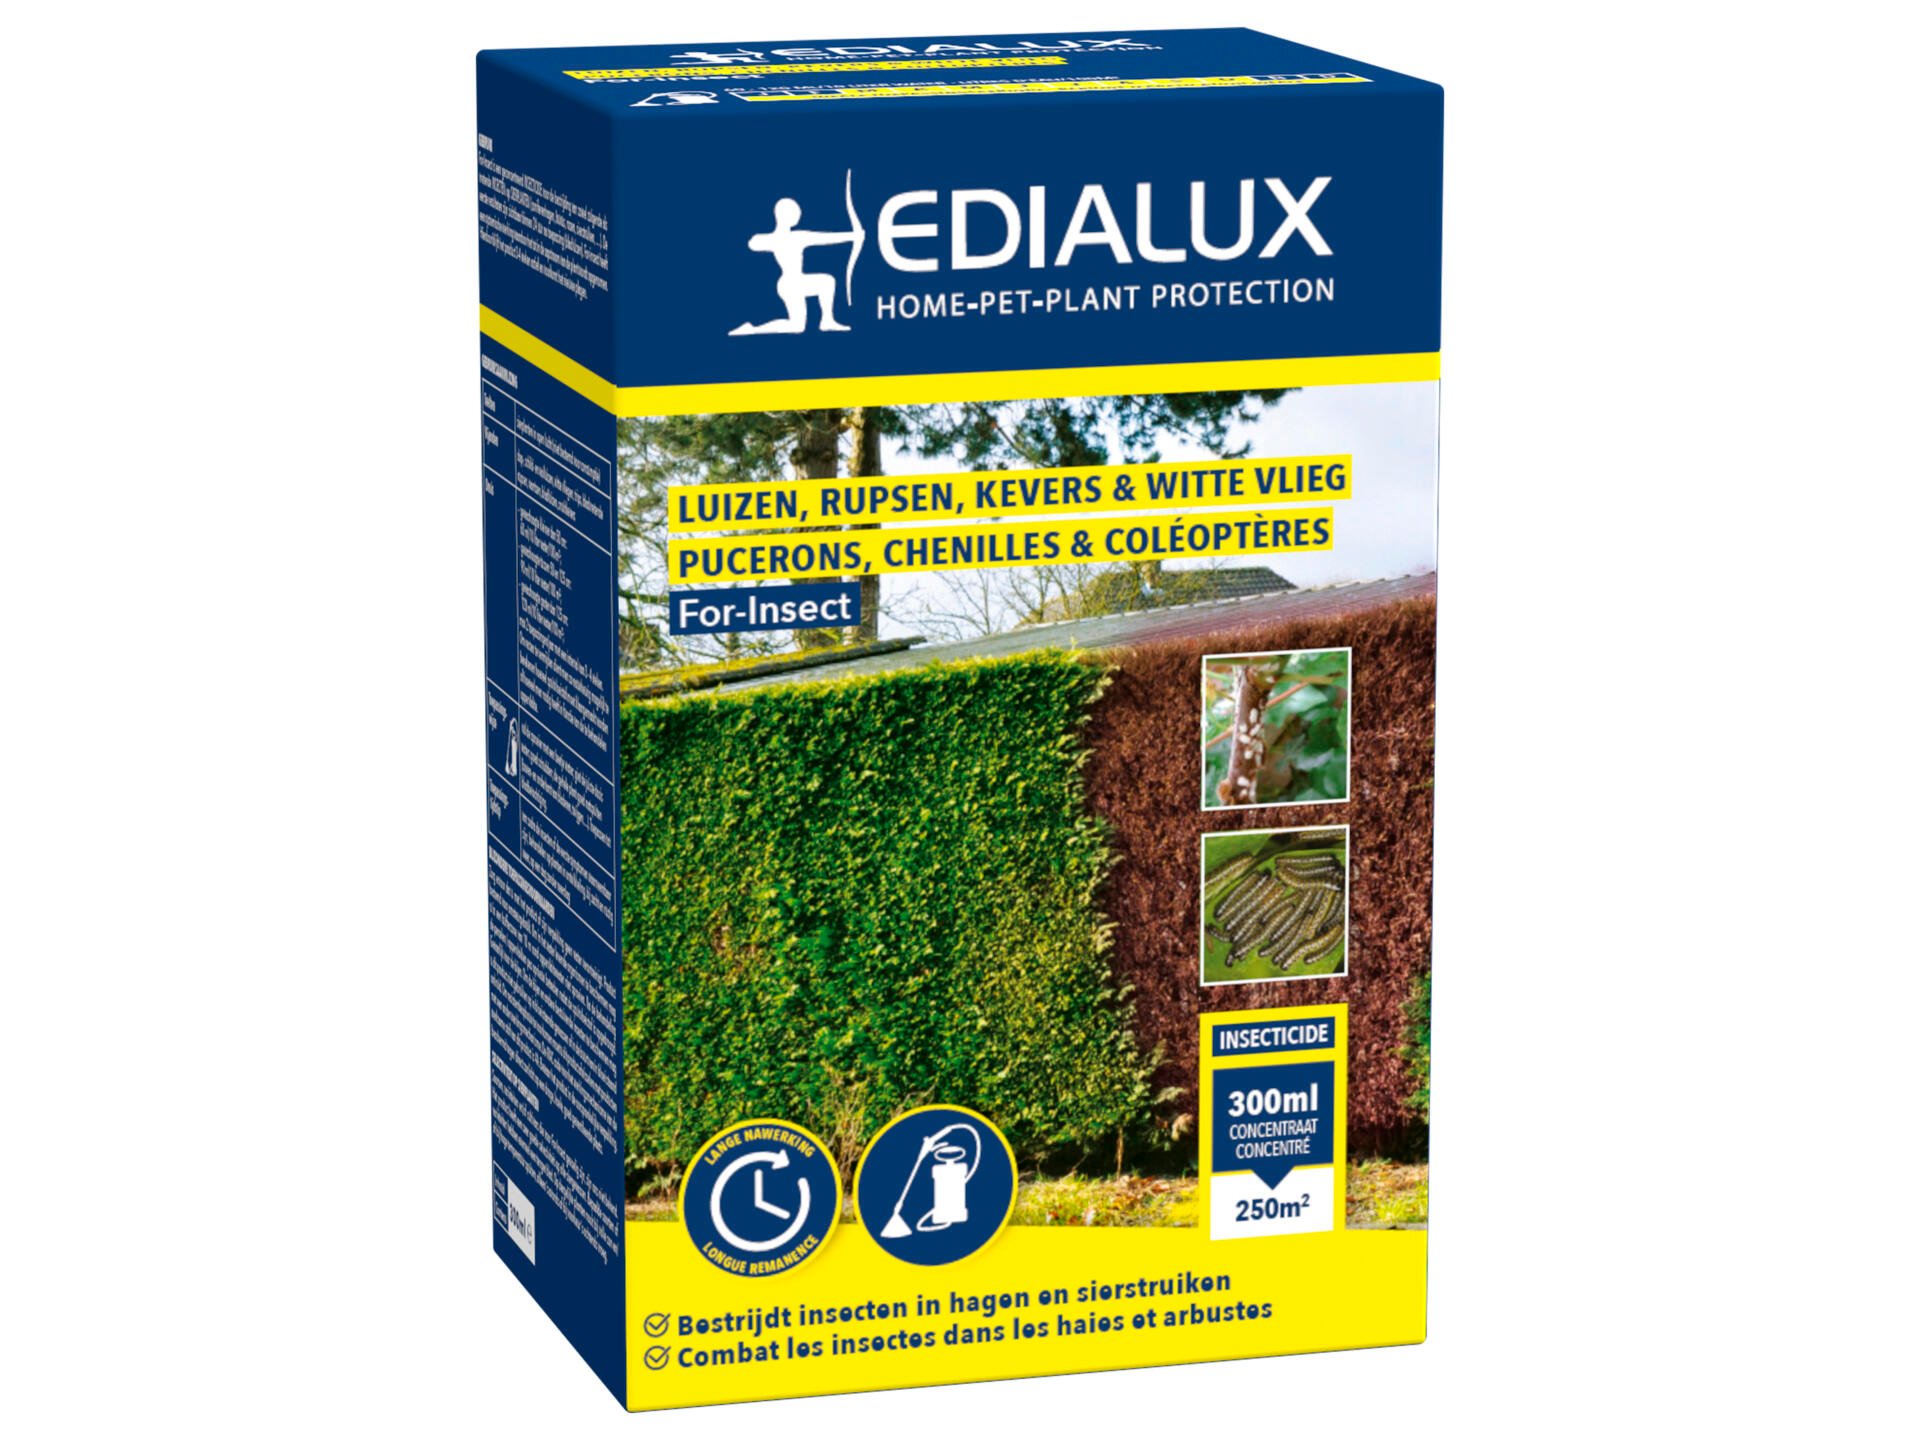 Edialux For-Insect insecticide 300ml